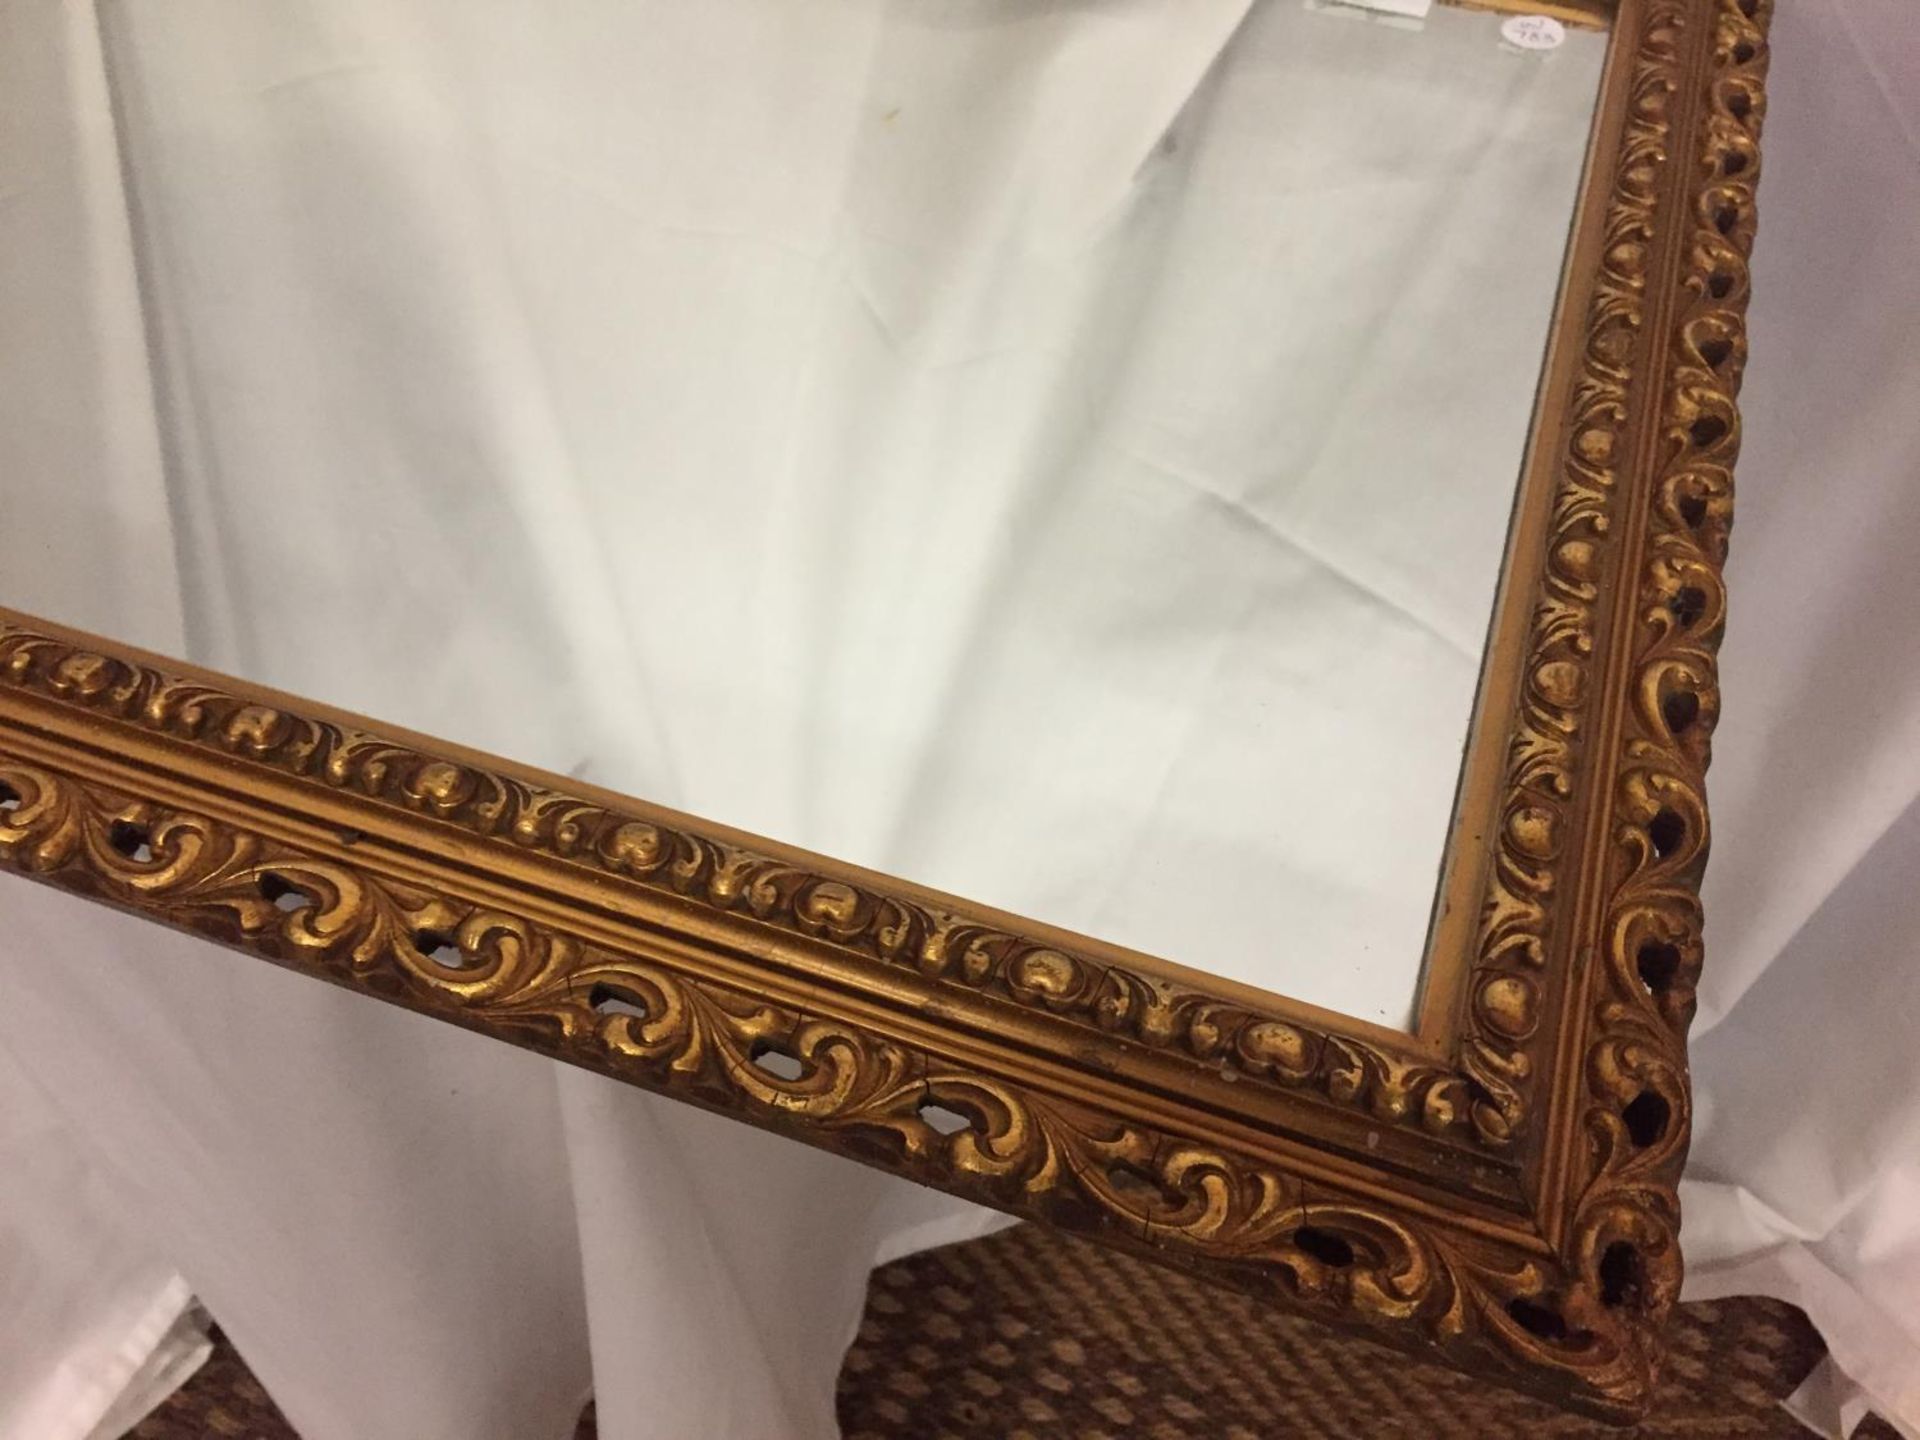 A GILT FRAMED MIRROR SIZE 27 INCHES X 19 INCHES - Image 2 of 4